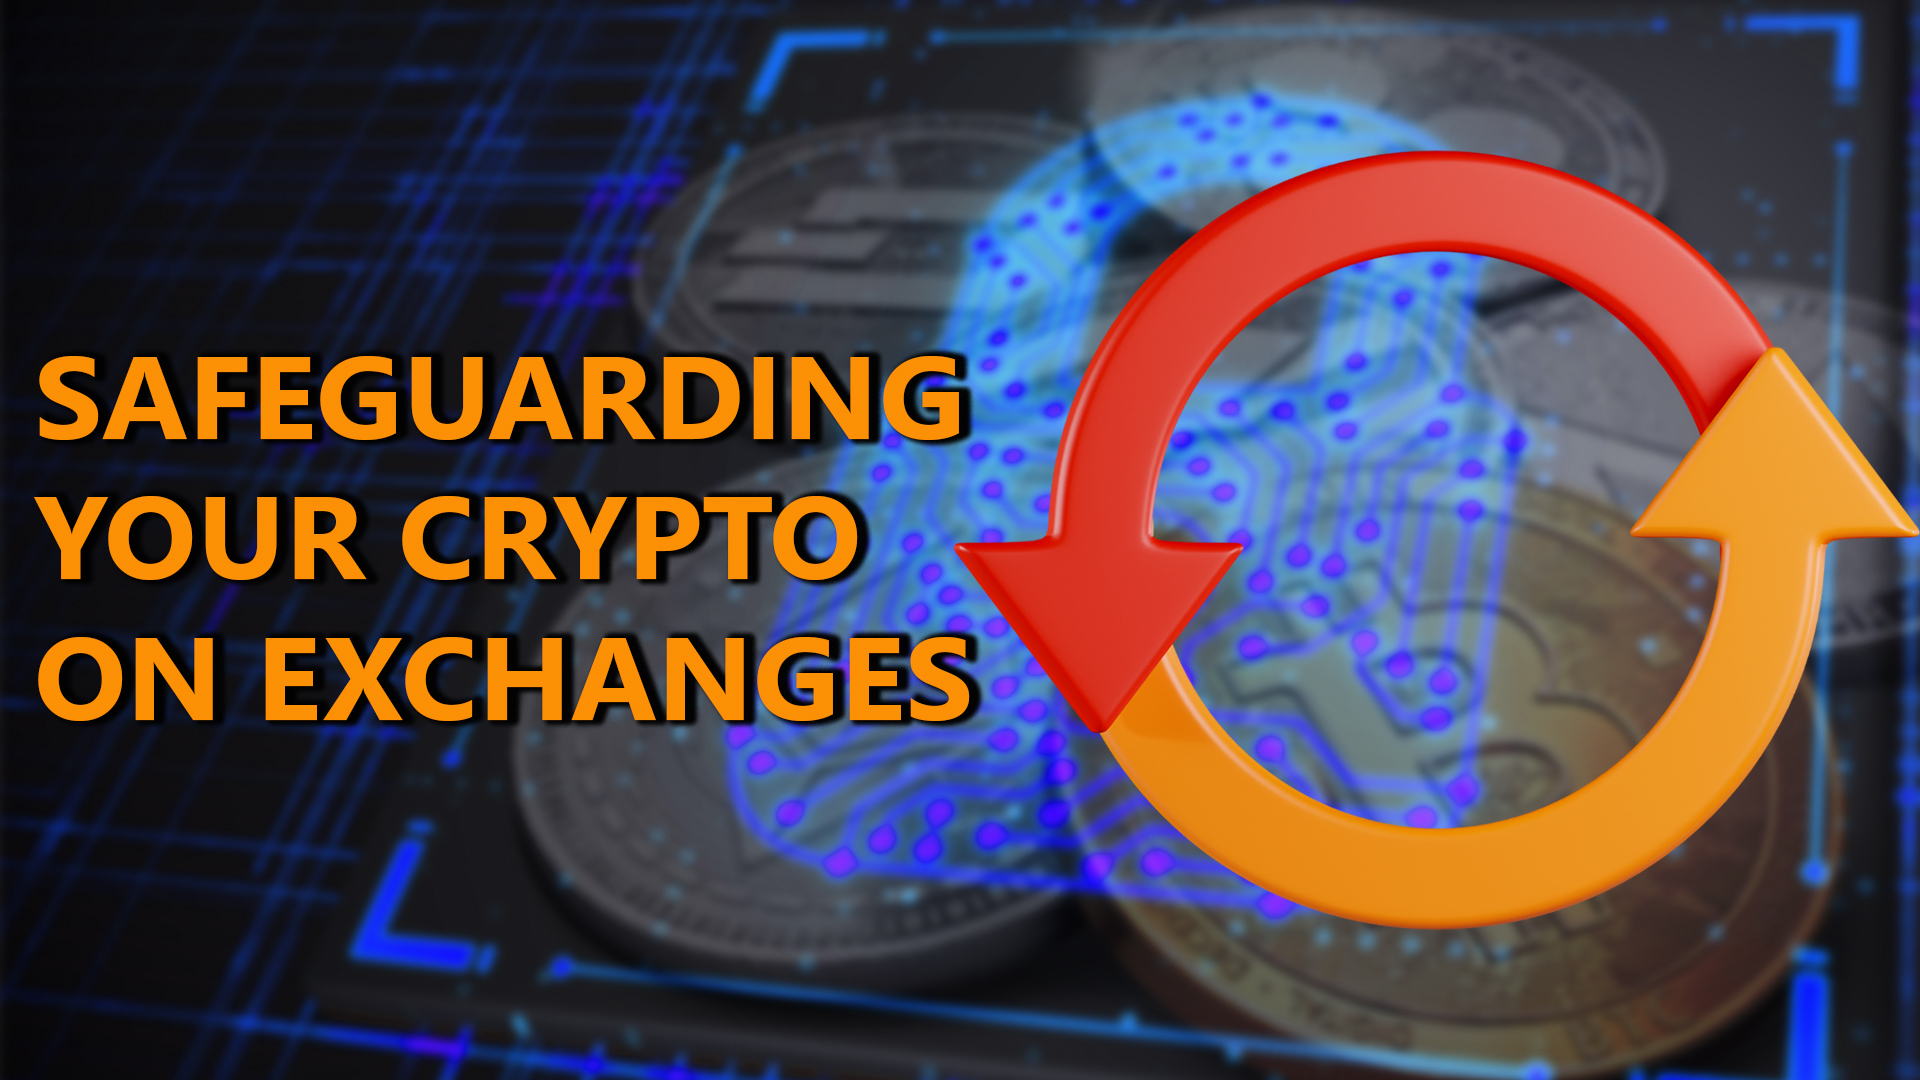 Safeguarding Your Crypto on Exchanges